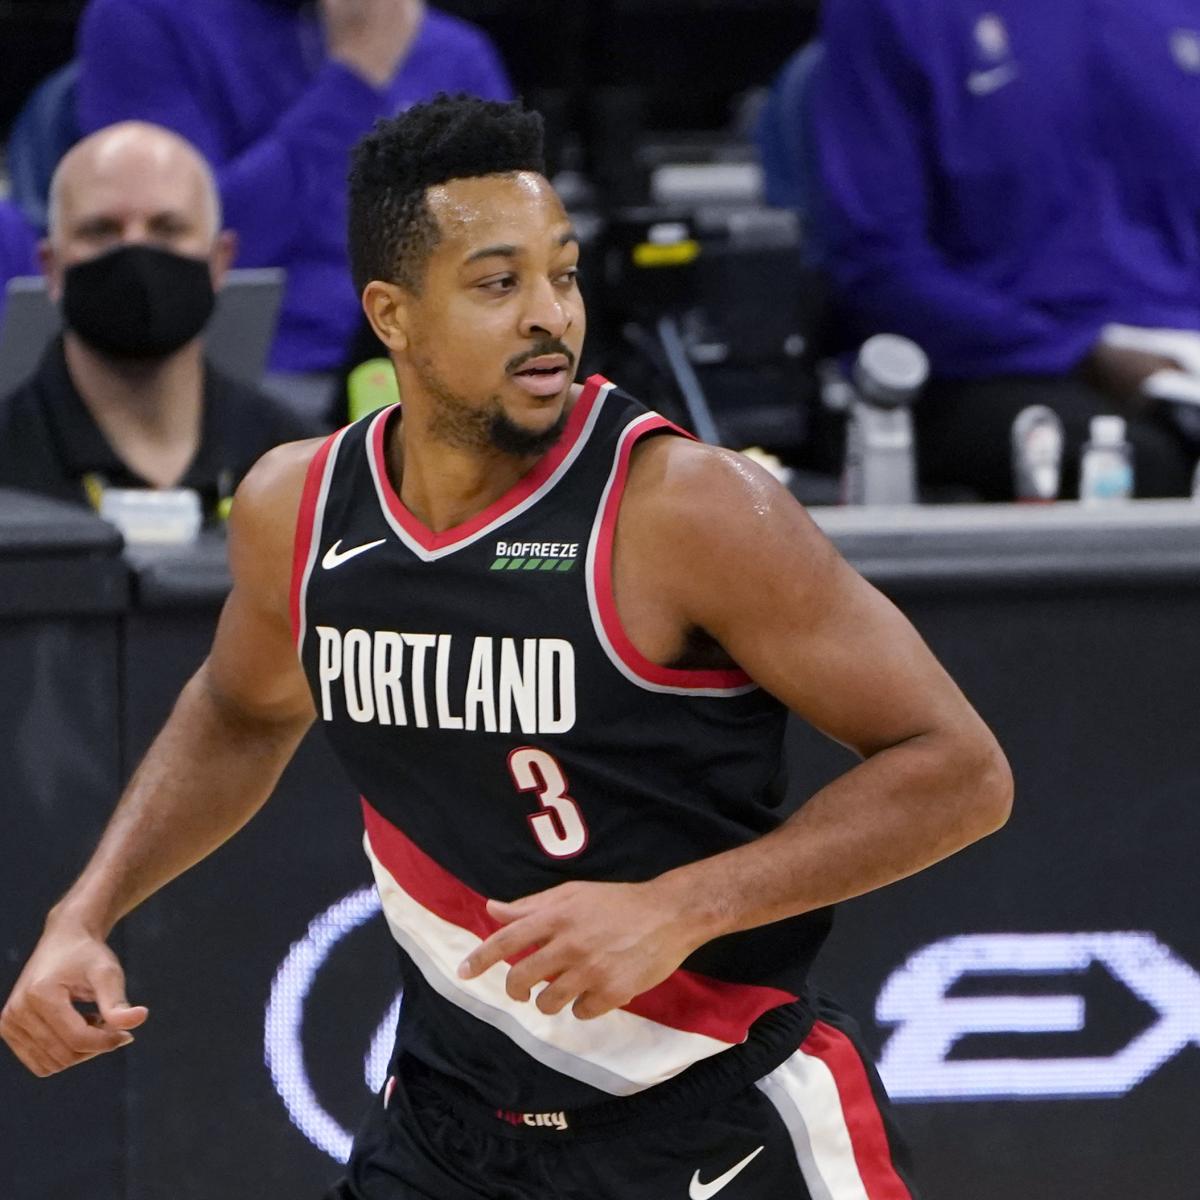 C.J. McCollum recalls being cut from Team USA in college